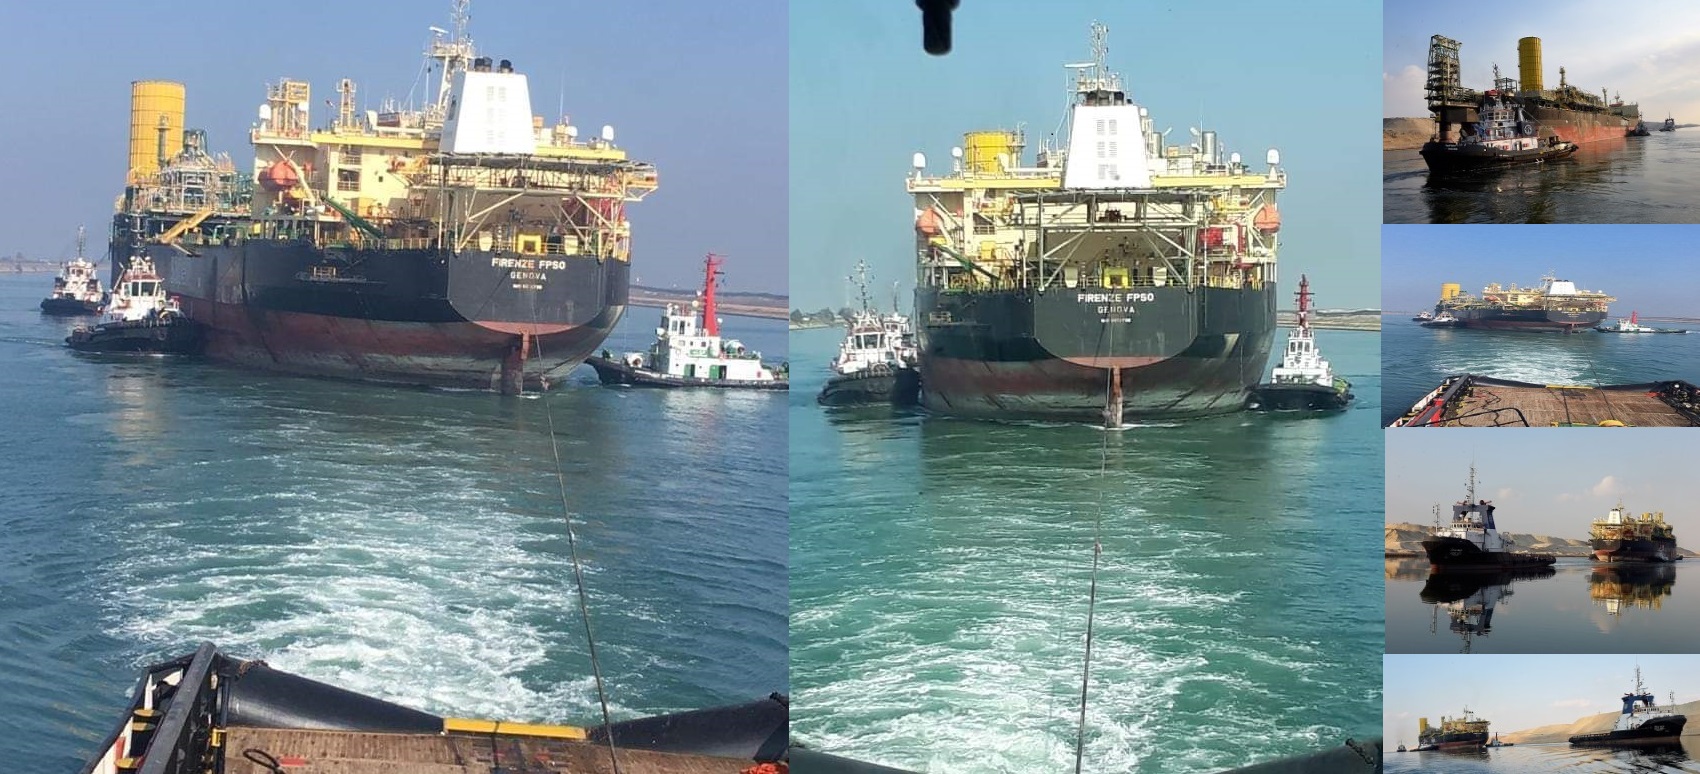 Suez Canal experienced one of the hardest passage of a reared towed Offshore Support Vessel: FIRENZE FPSO with USD 2.5 million for transit tolls under the succesfull supervision of our agency World Marine.